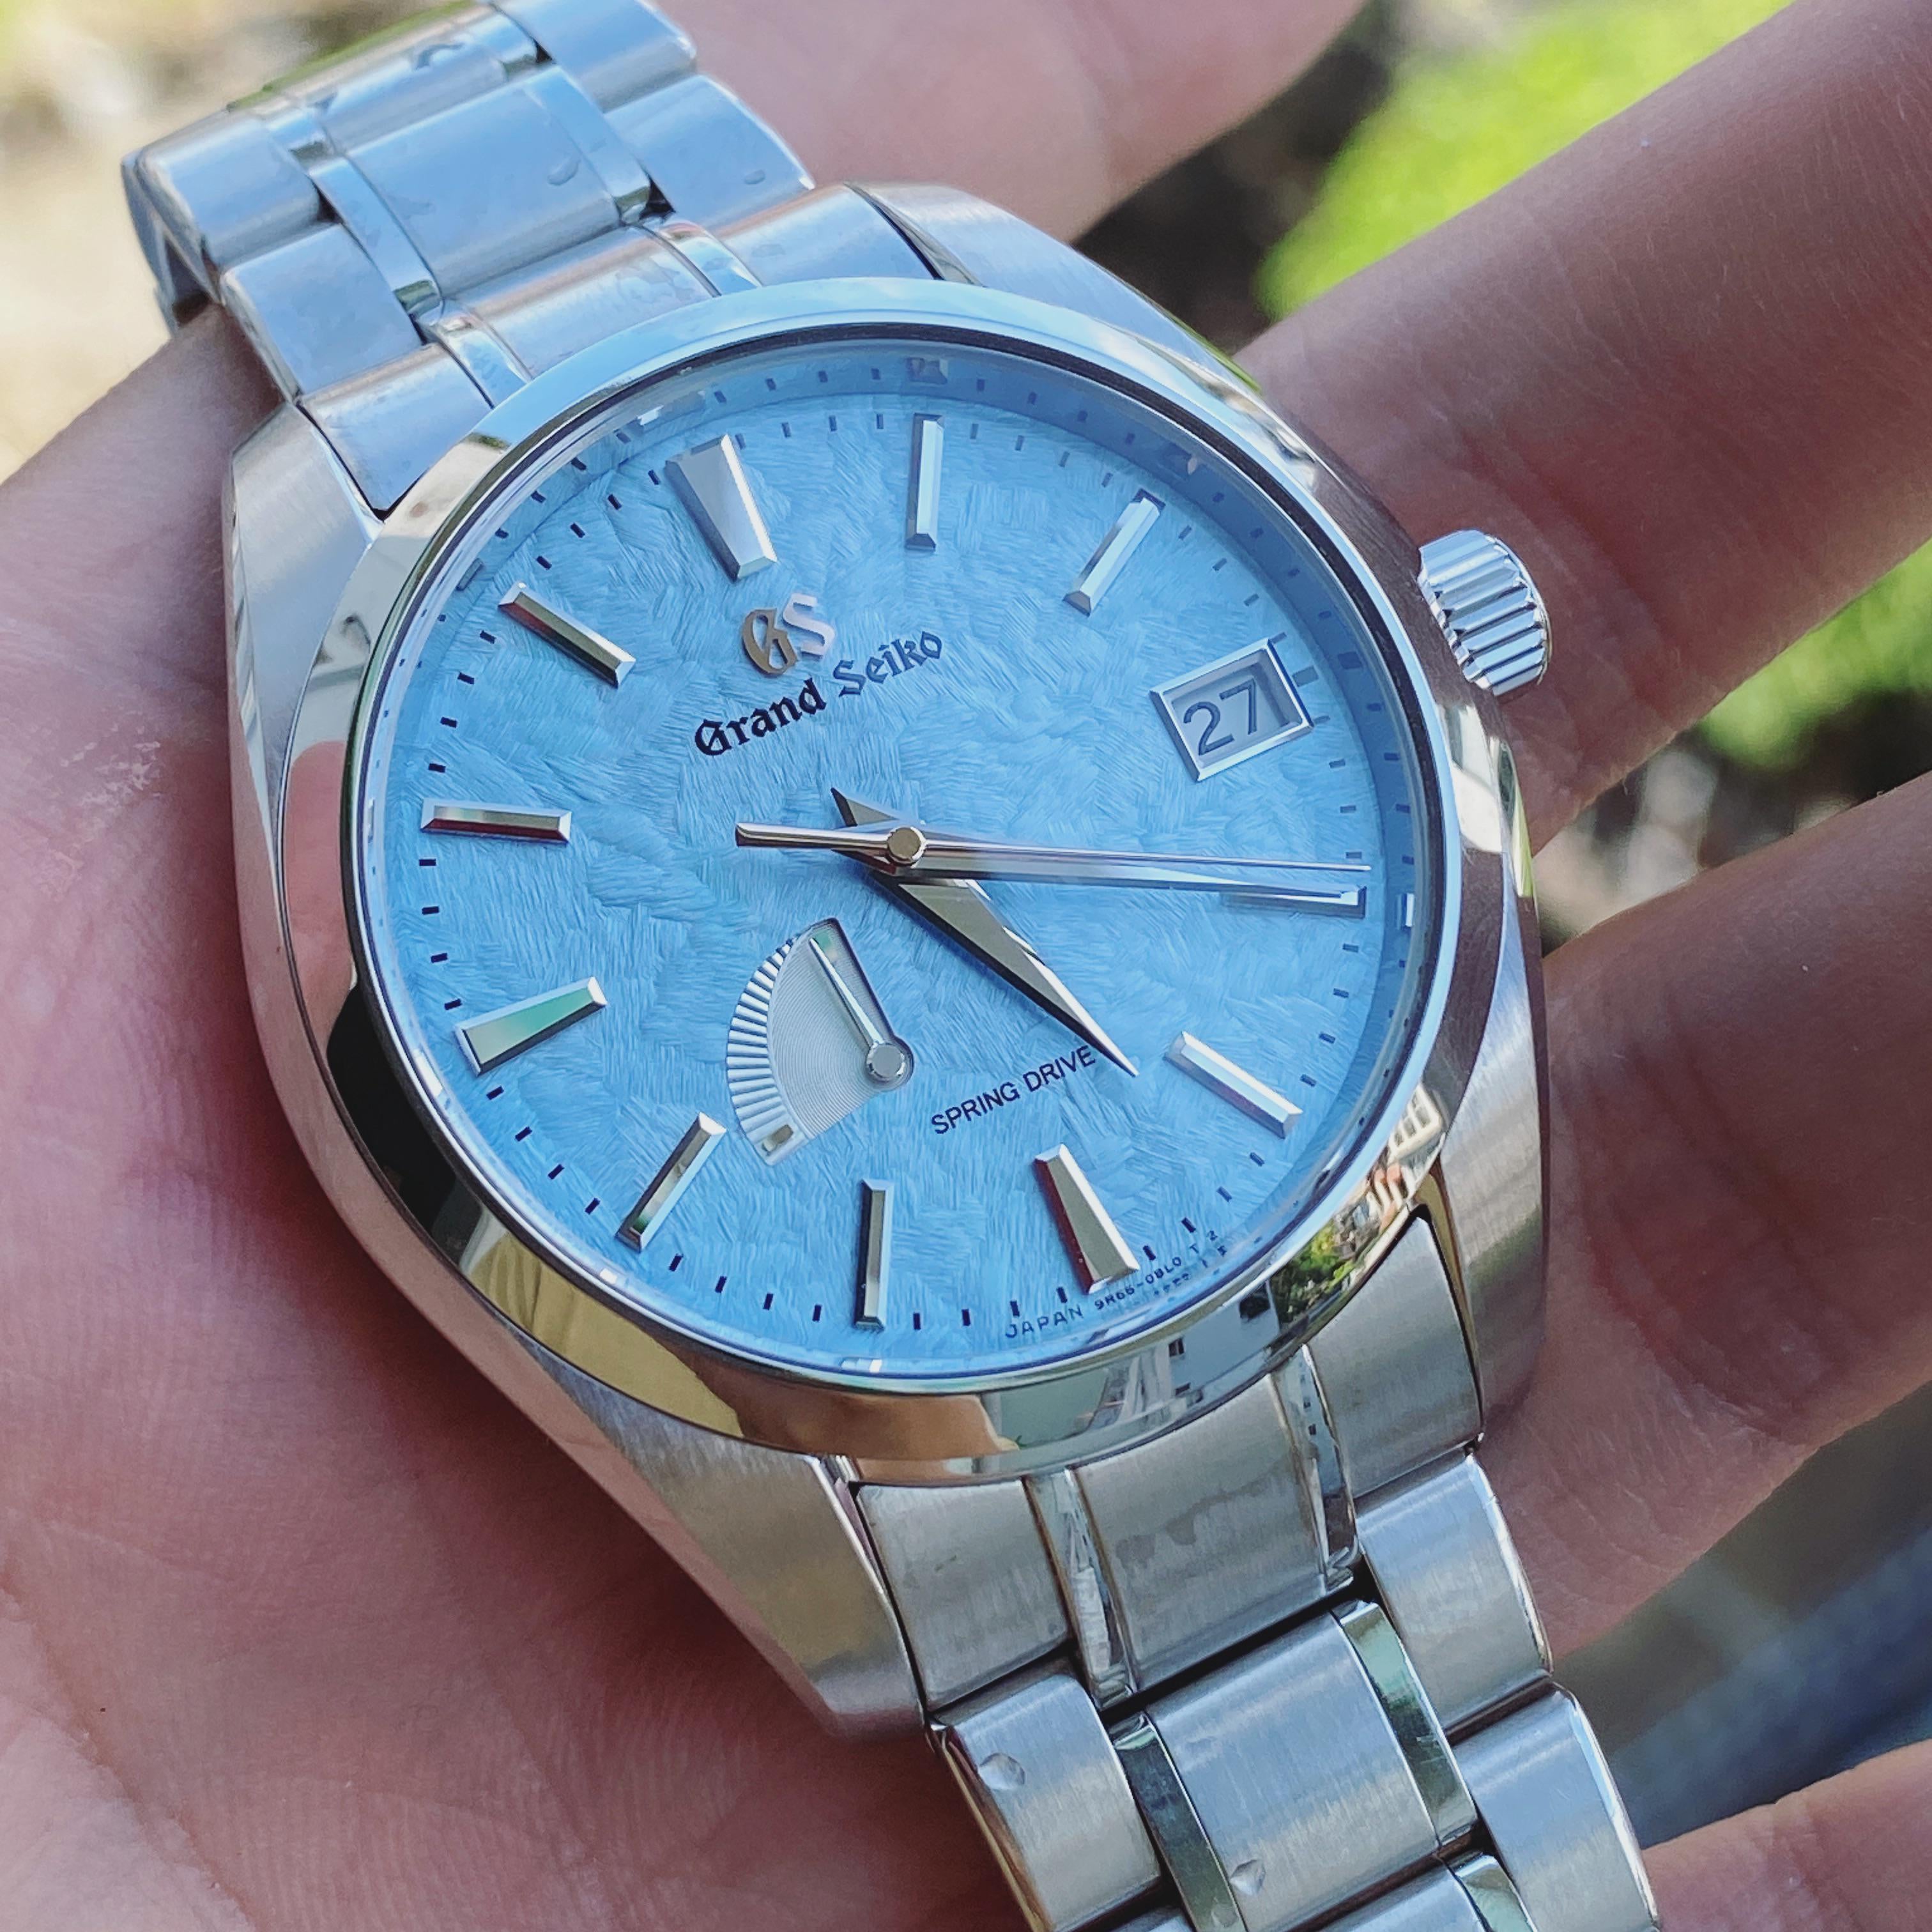 WTS] GRAND SEIKO SBGA435 - Limited for China - Tiffani color dial - Box &  papers added) | WatchCharts